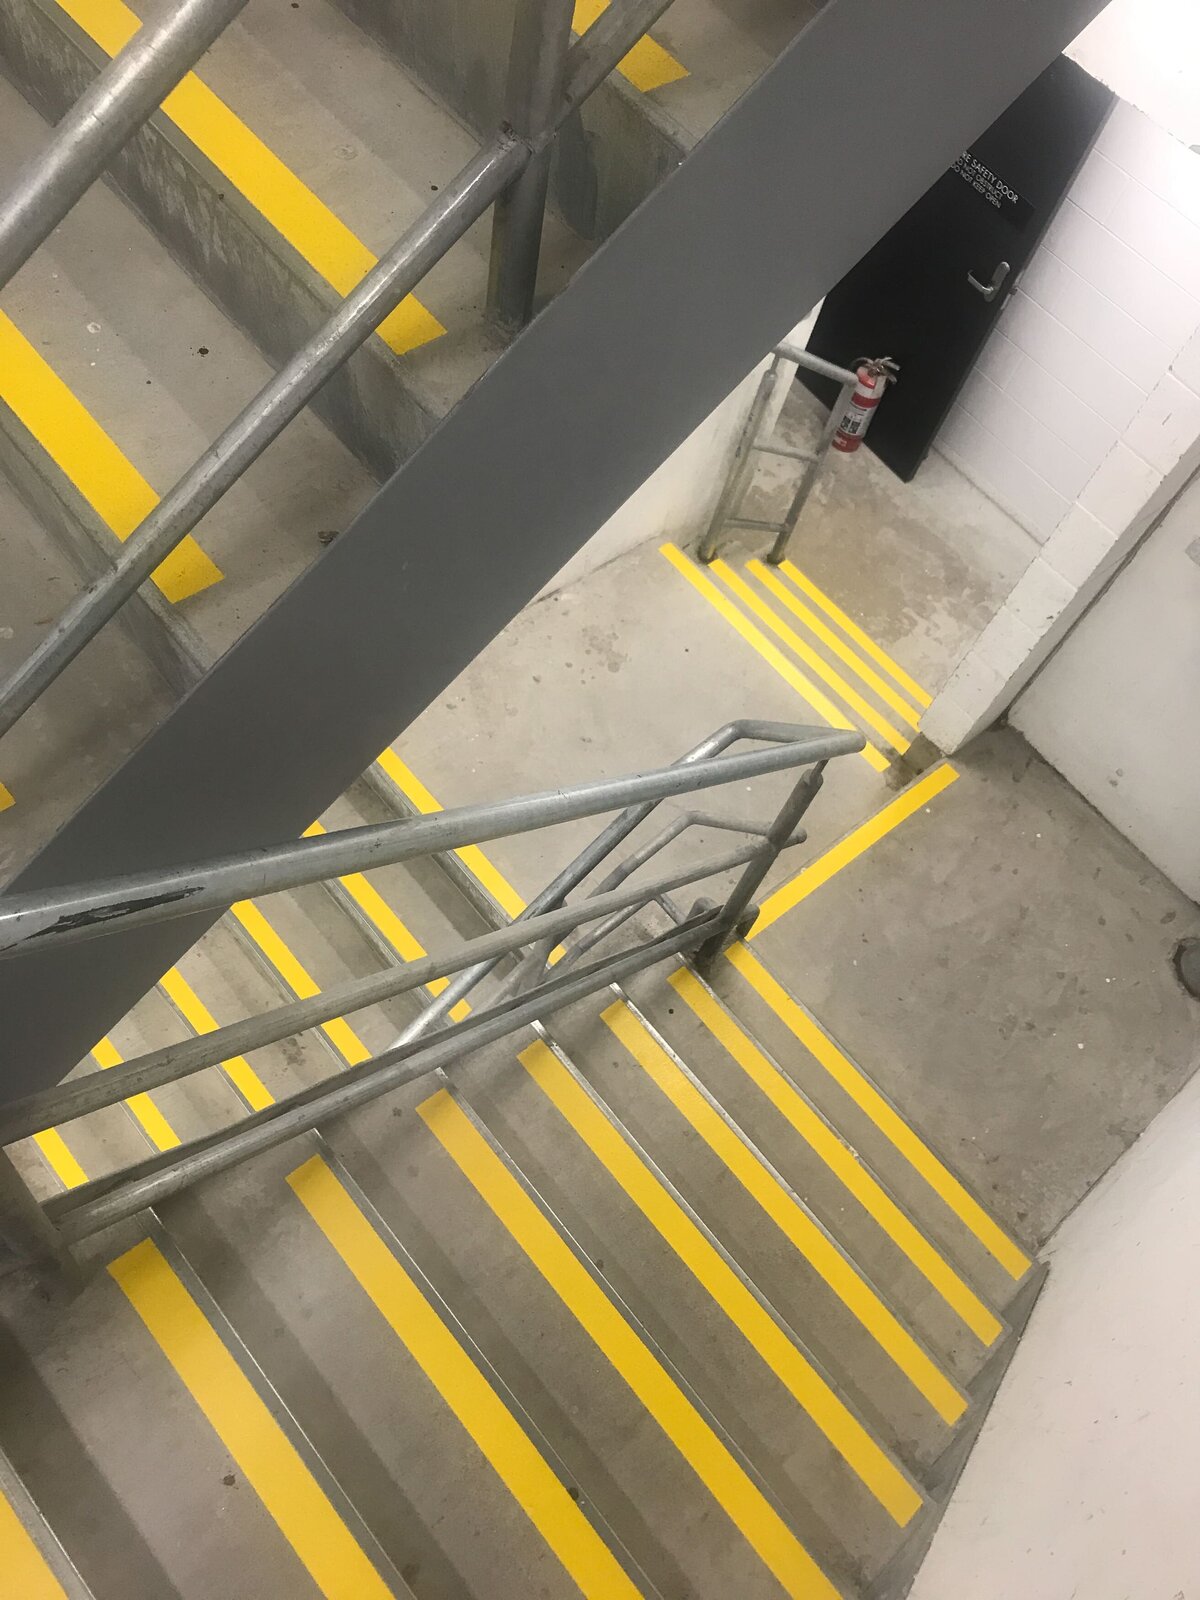 Painted linemarking stair treads, down an interior emergency stairwell